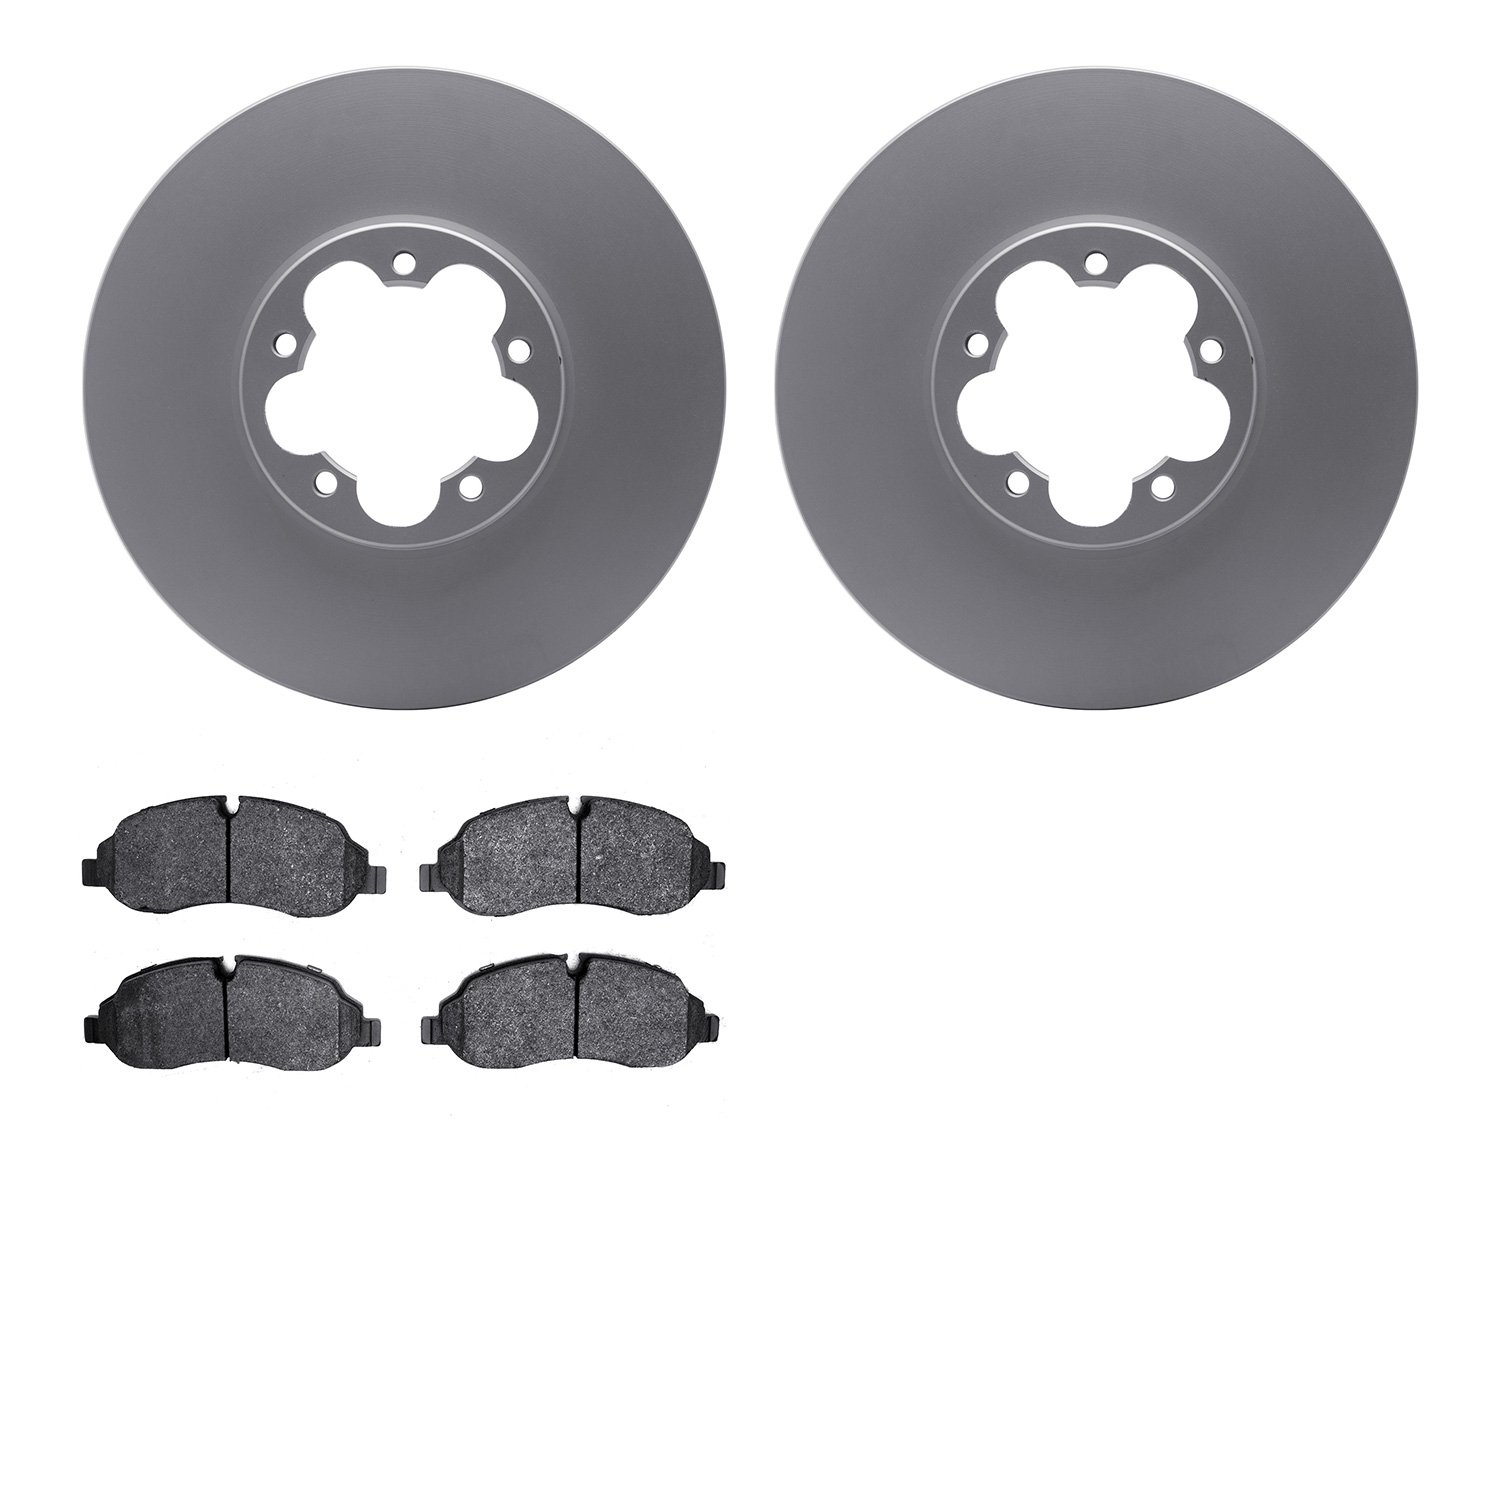 4202-99198 Geospec Brake Rotors w/Heavy-Duty Brake Pads Kit, Fits Select Ford/Lincoln/Mercury/Mazda, Position: Front